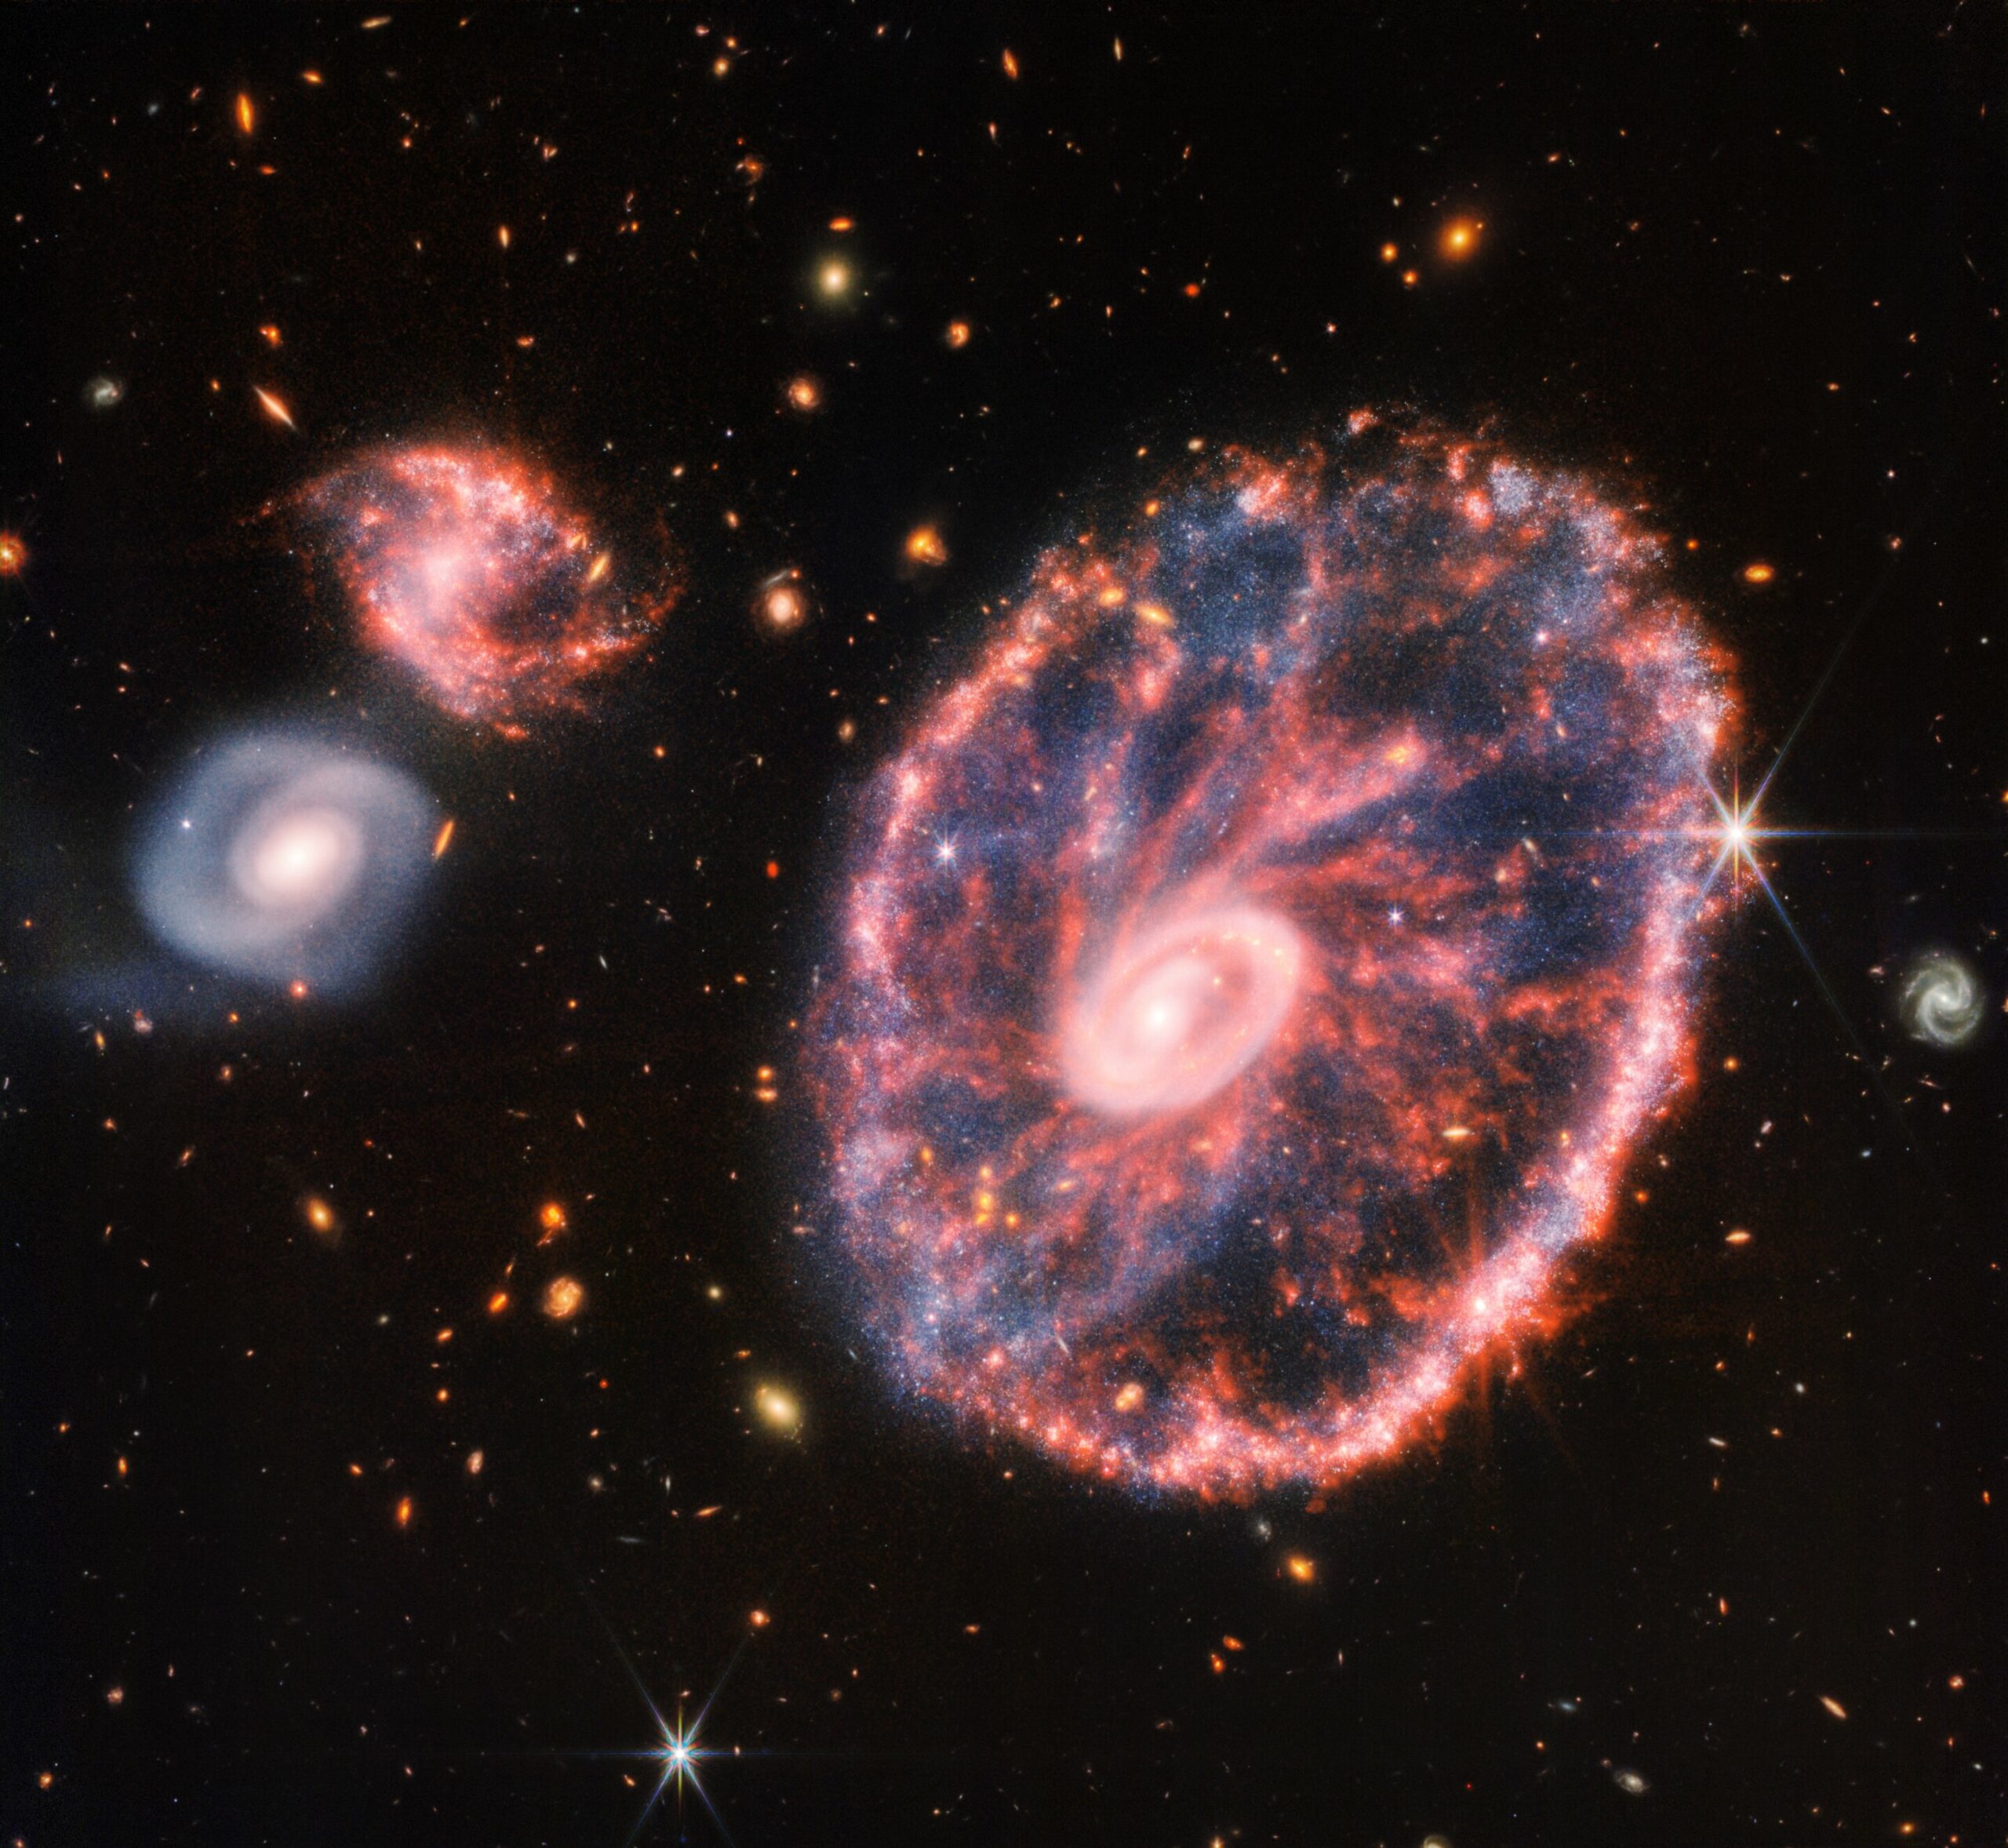 The Cartwheel Galaxy is brilliantly captured by the Webb telescope, showcasing its vibrant colors.